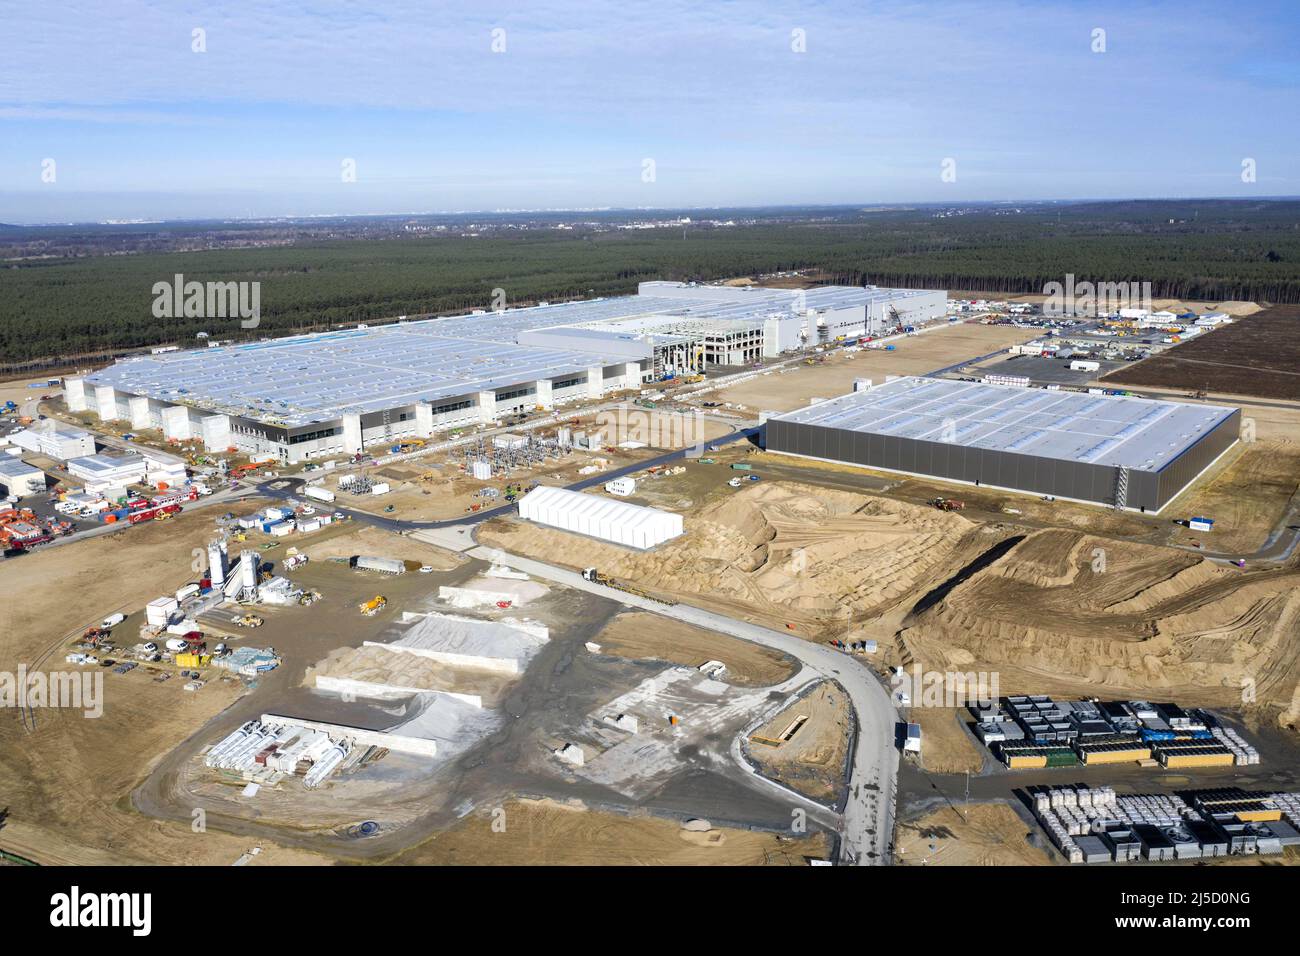 Gruenheide, DEU, 22.03.2021 - Aerial view of the Tesla Gigafactory construction site in the Freienbrink district of Gruenheide. From summer 2021, 500,000 electric cars per year are to be produced here. [automated translation] Stock Photo